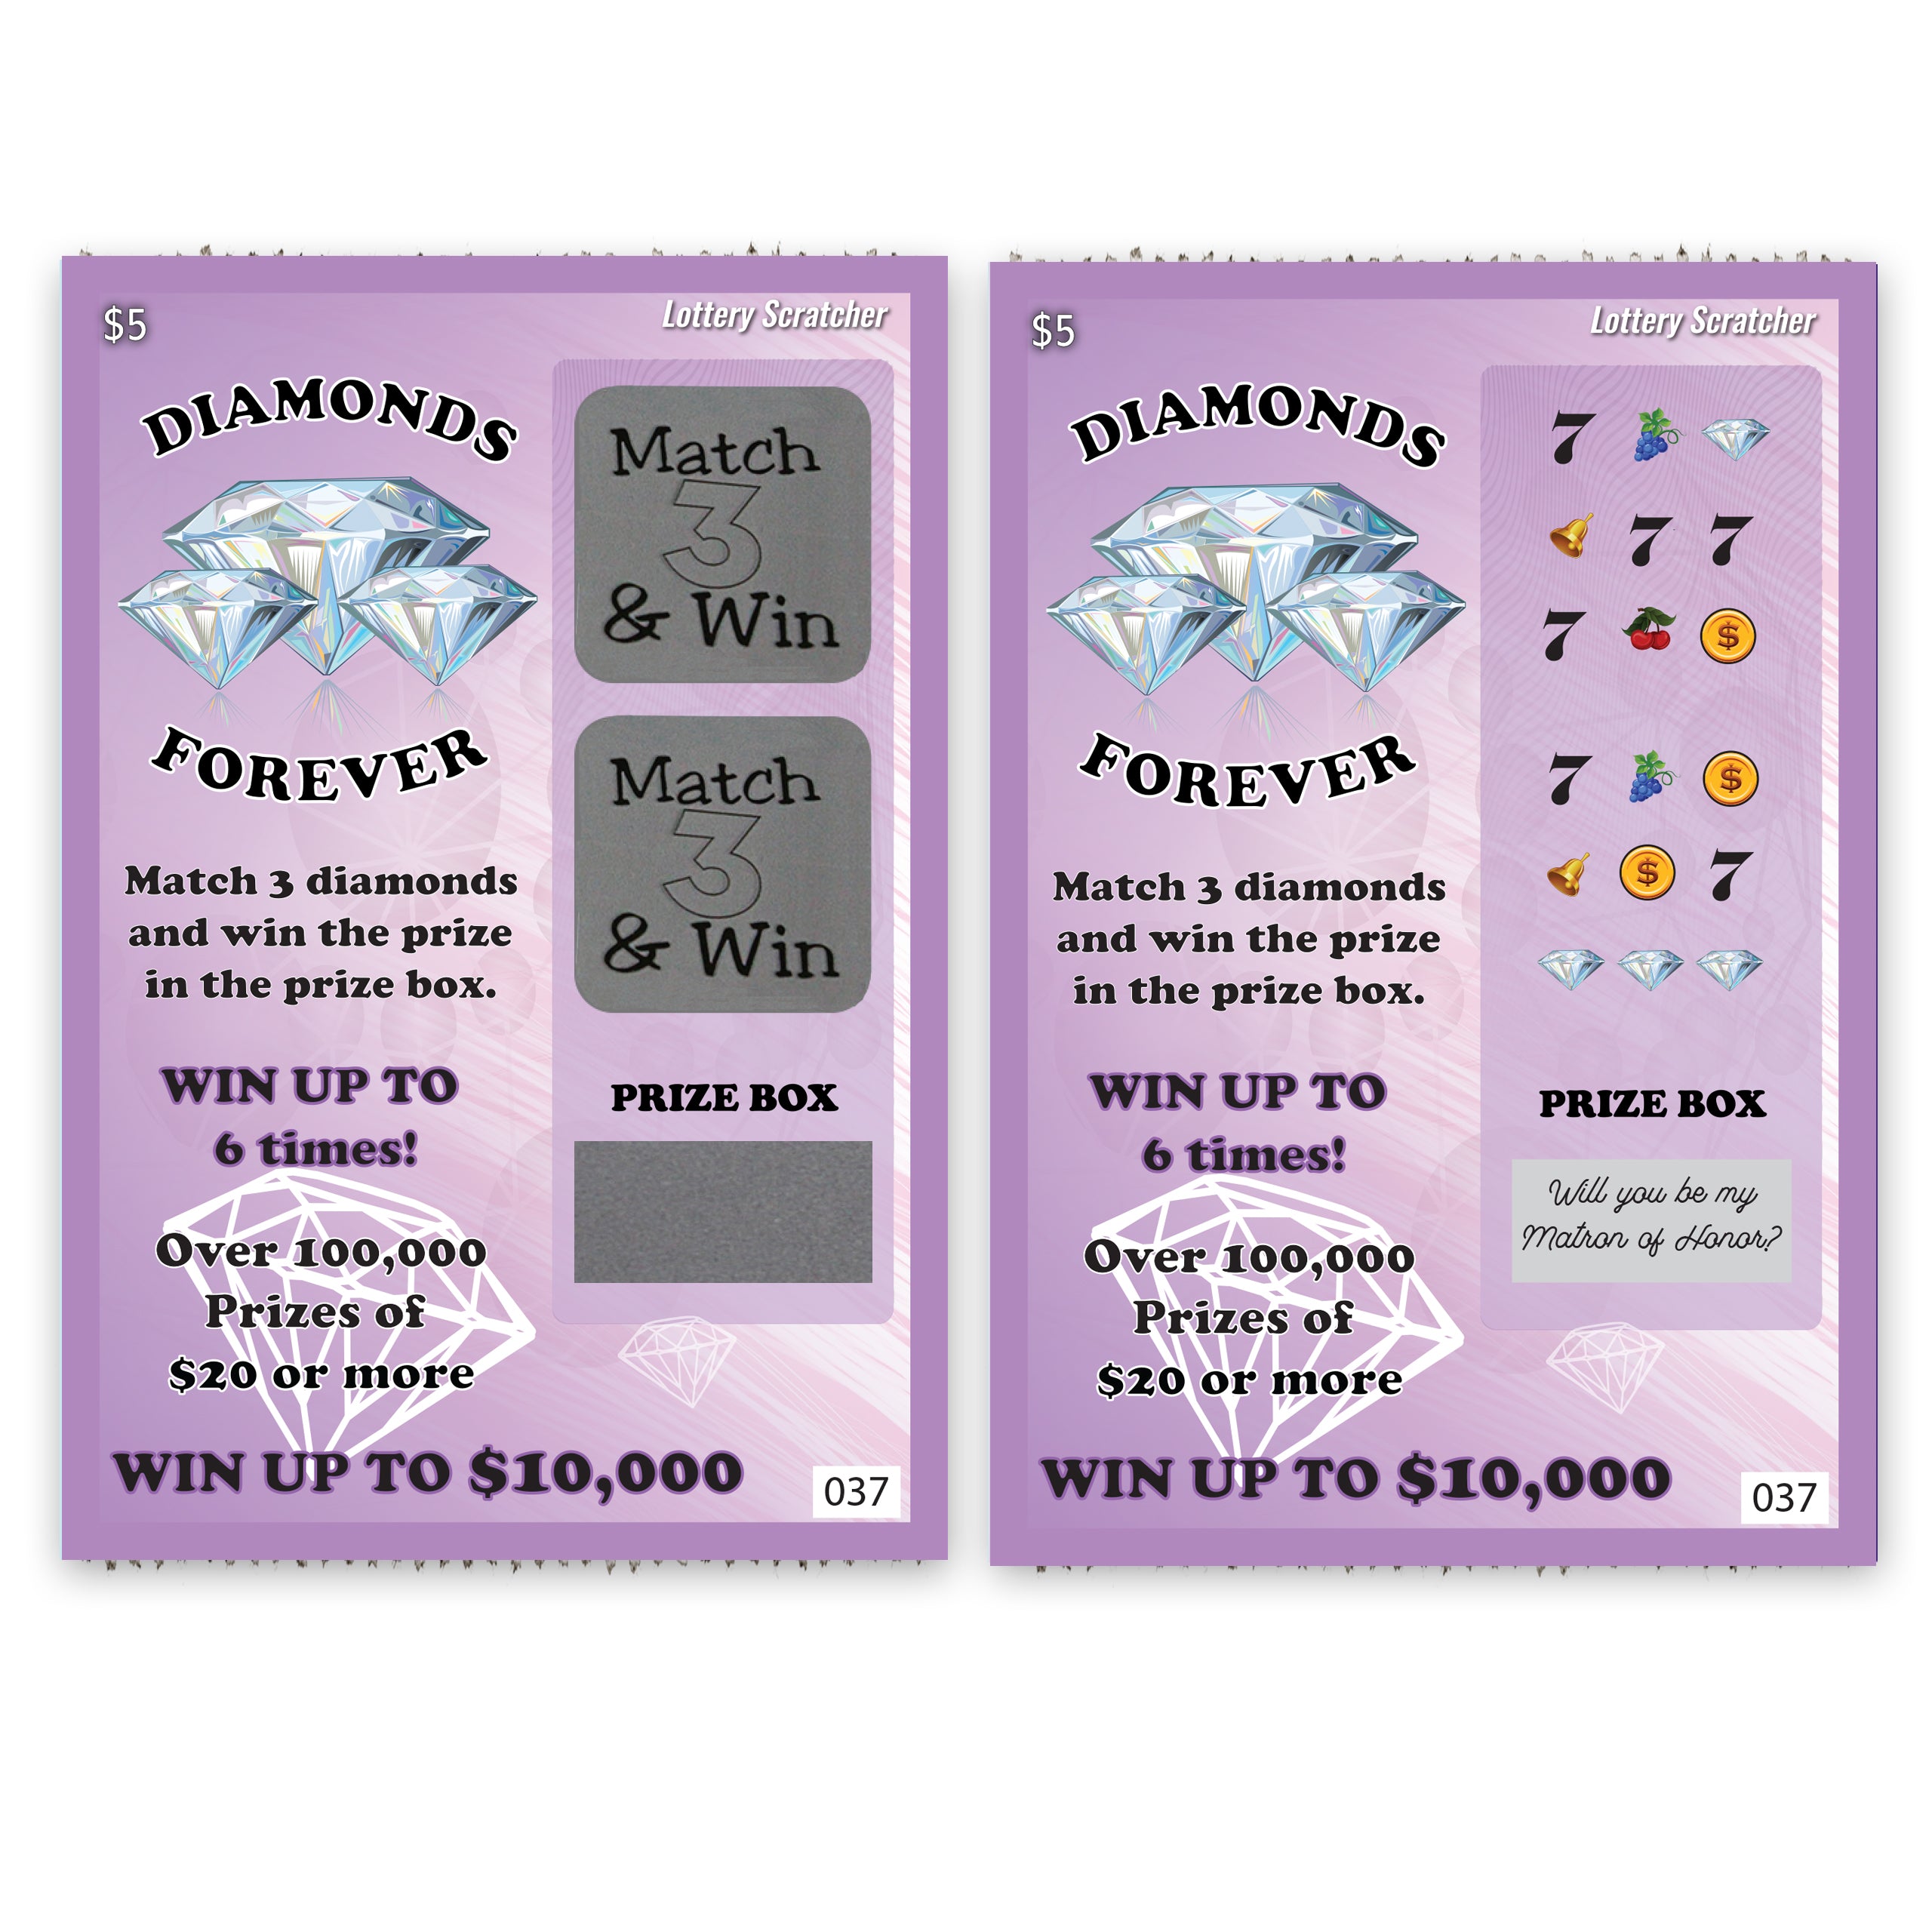 Will You Be My Matron of Honor? Lotto Replica Scratch Off Card 4" x 6" - Lavender